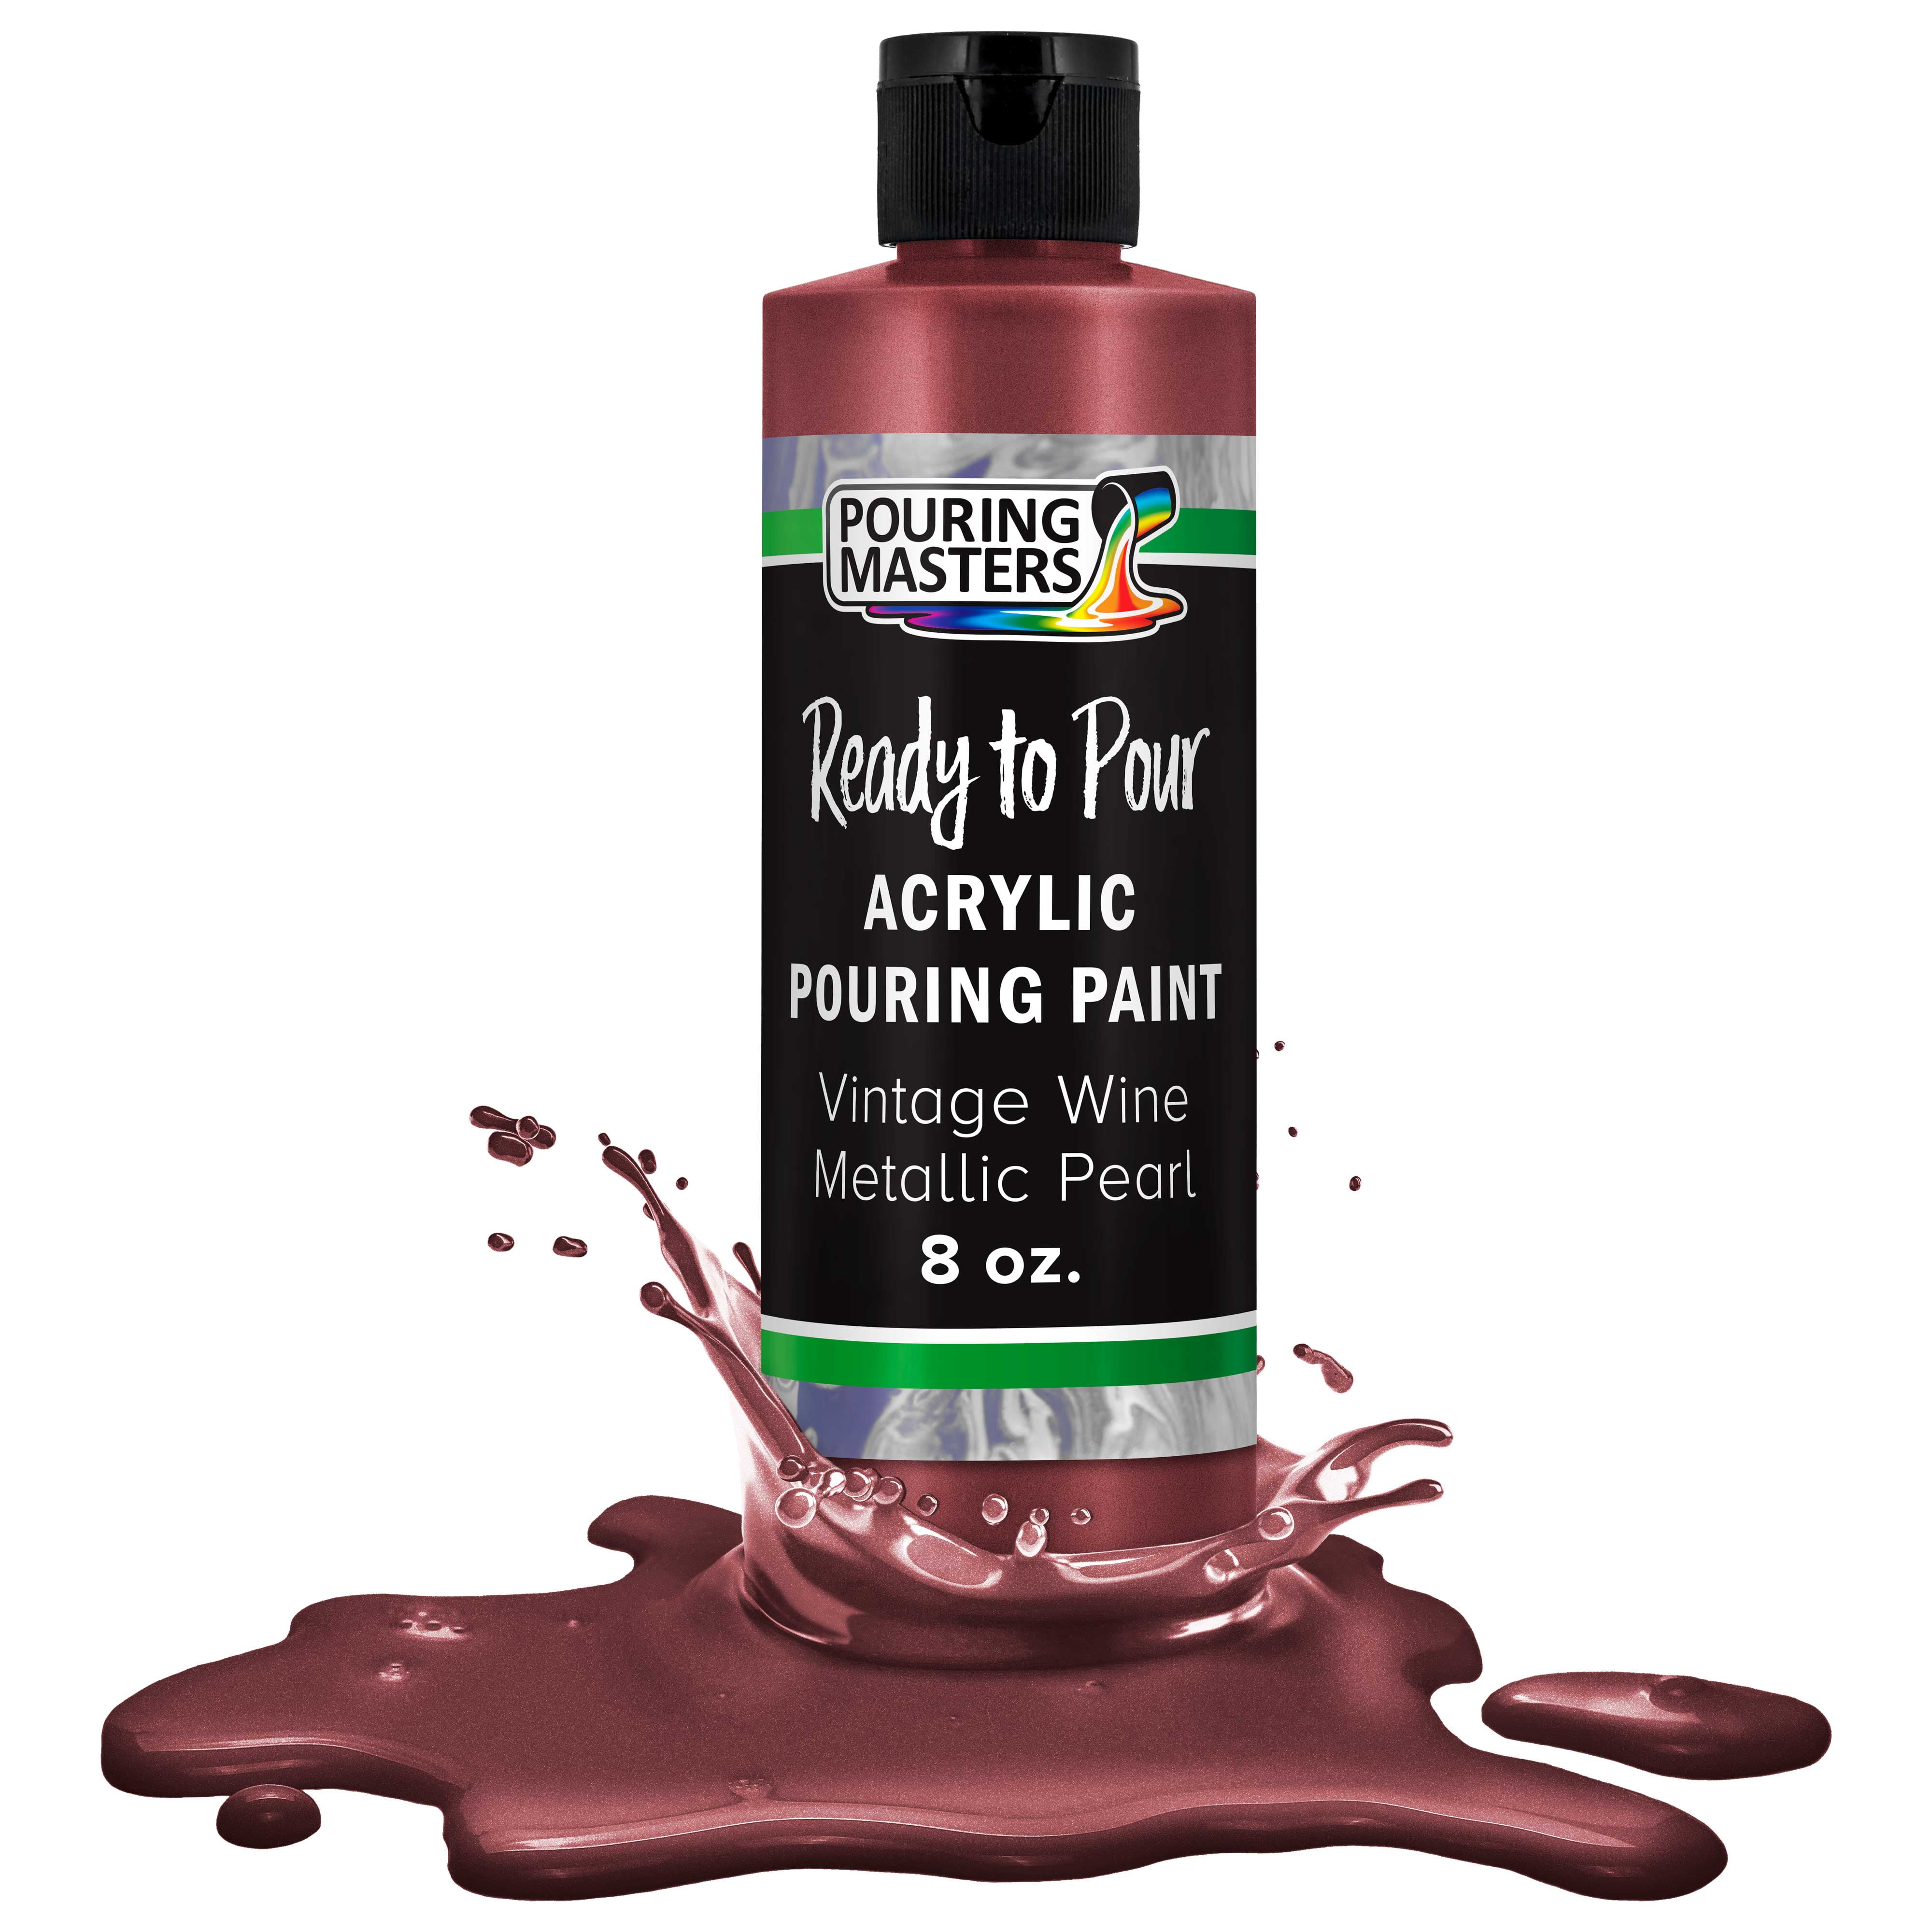 Pouring Masters Professional Acrylic Pearlescent Mixing Effects Medium, 8  oz. Bottle - Create Pearl Iridescent Metallic Effects, Improve Flow  Consistency, Artist Techniques, Mix with Art Acrylic Paint 